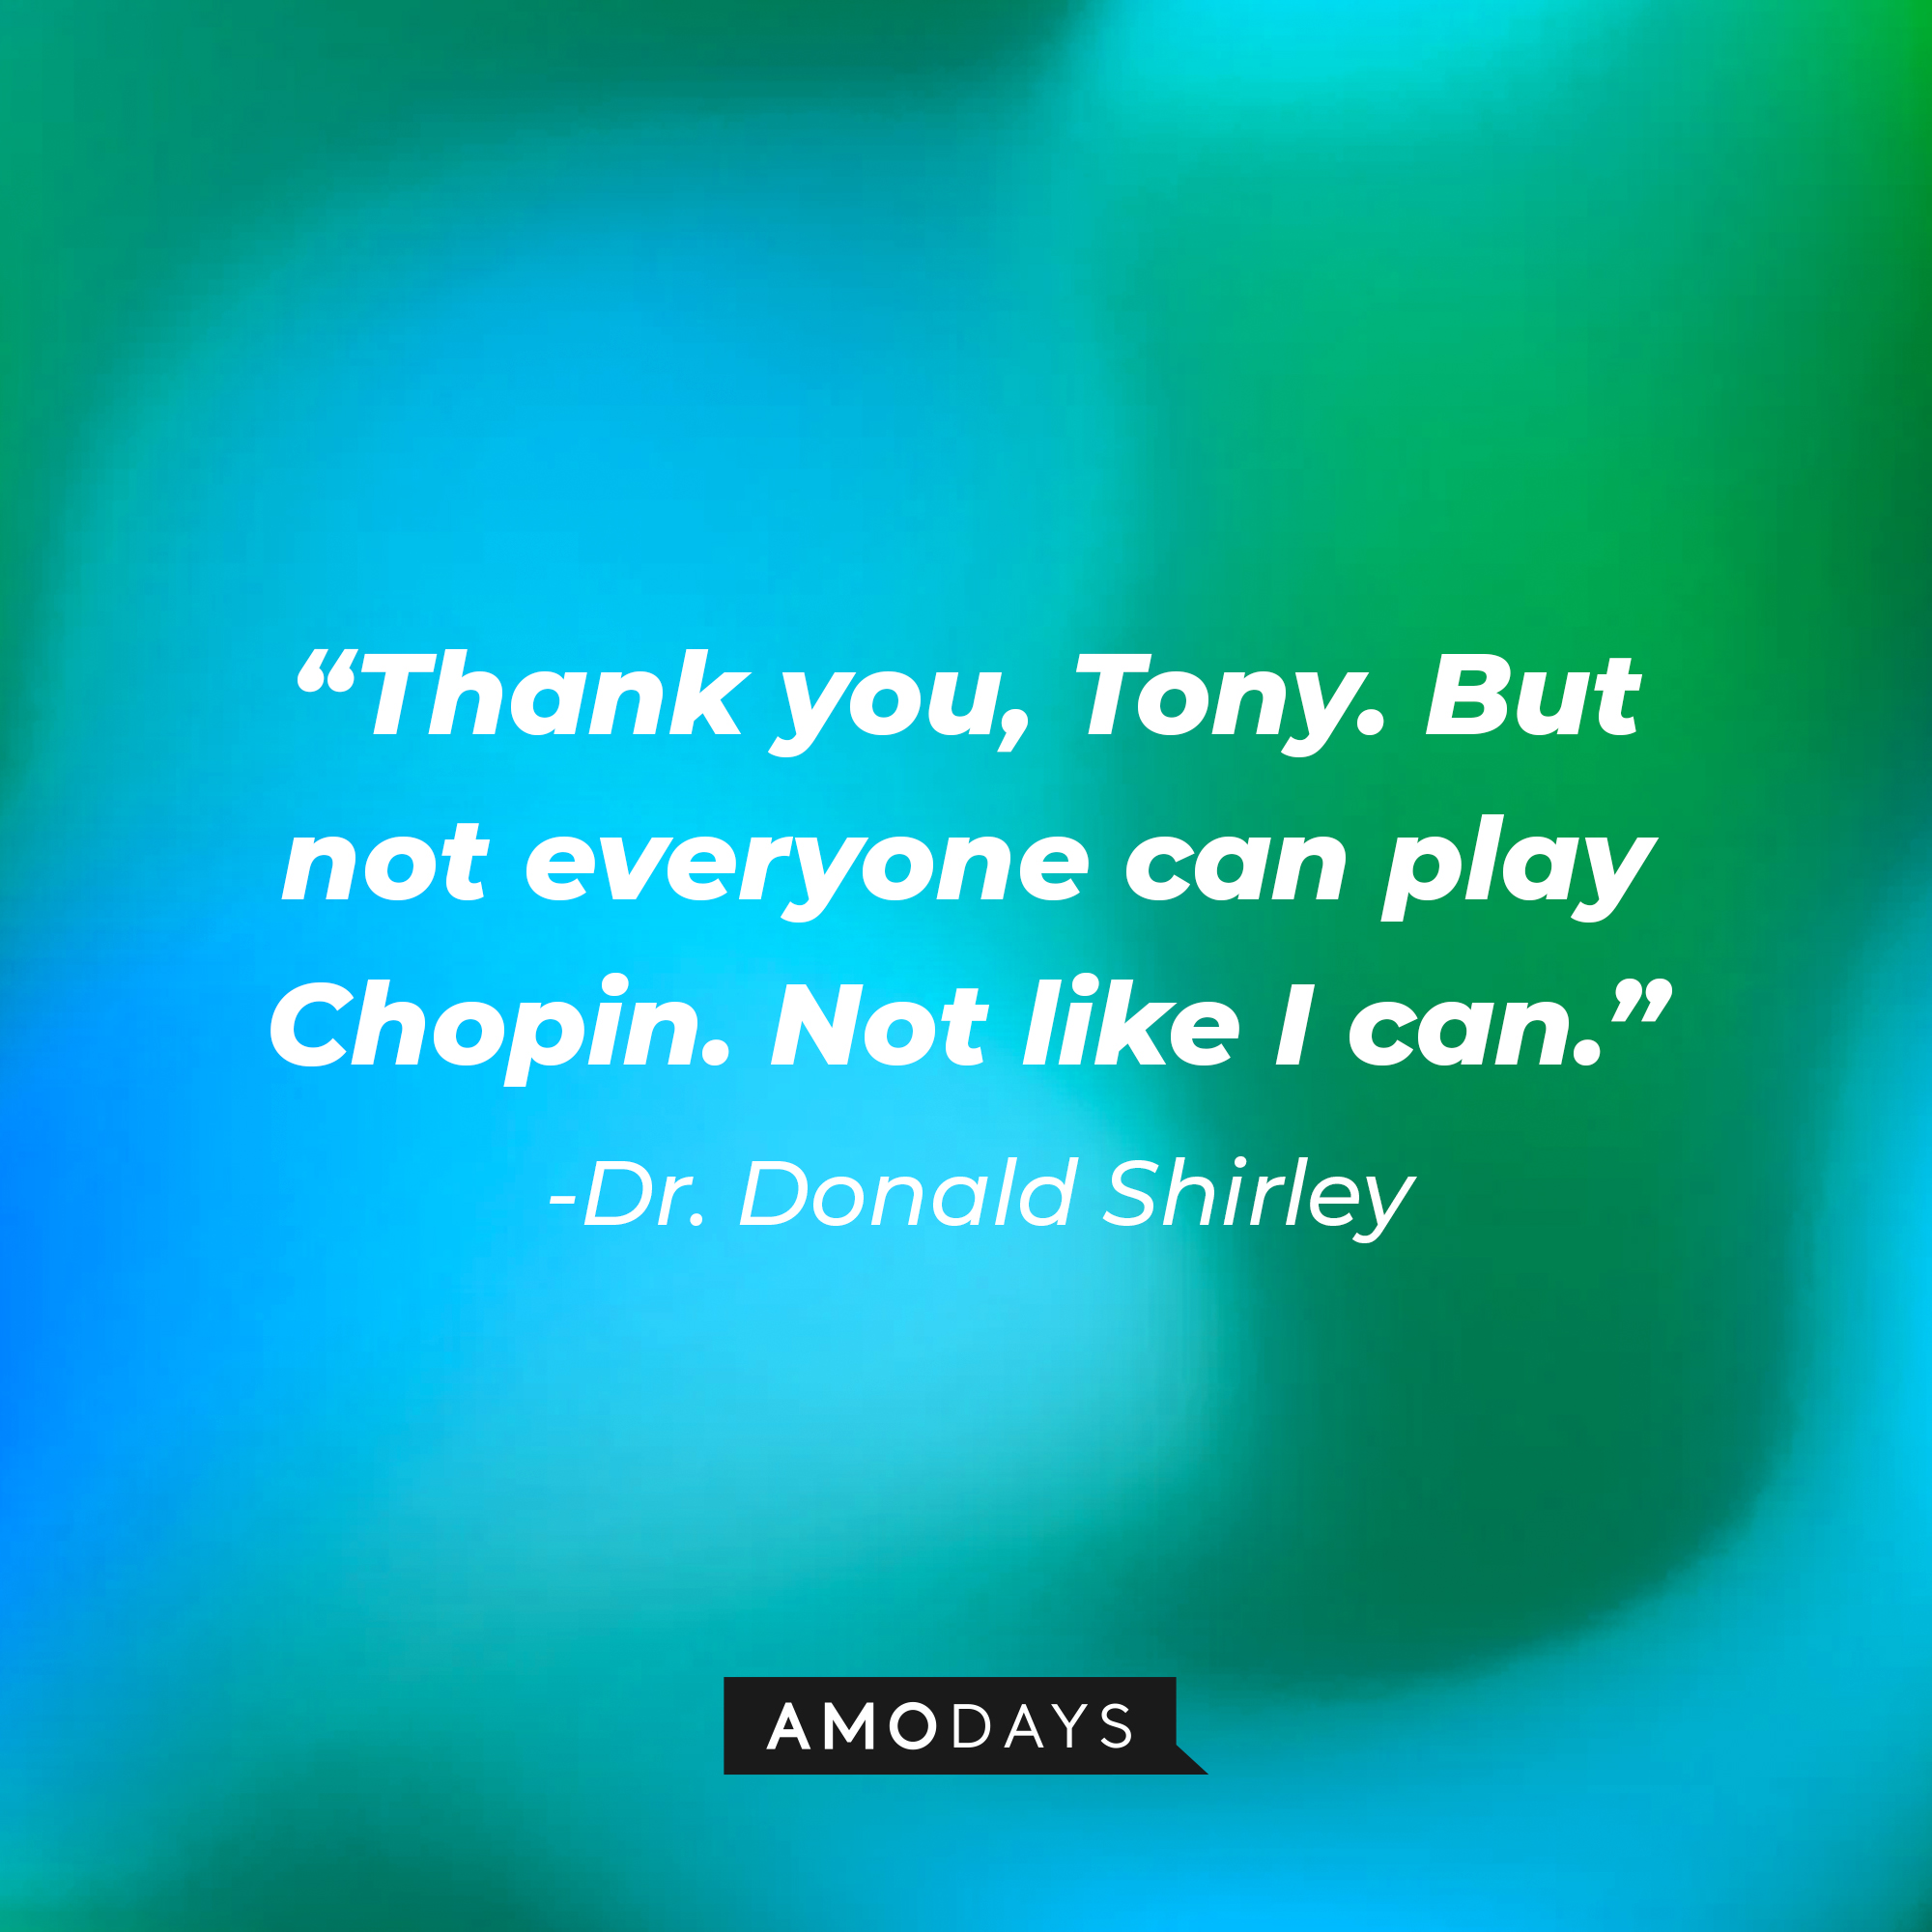 Dr. Donald Shirley's quote: “Thank you, Tony. But not everyone can play Chopin. Not like I can.” | Source: Amodays